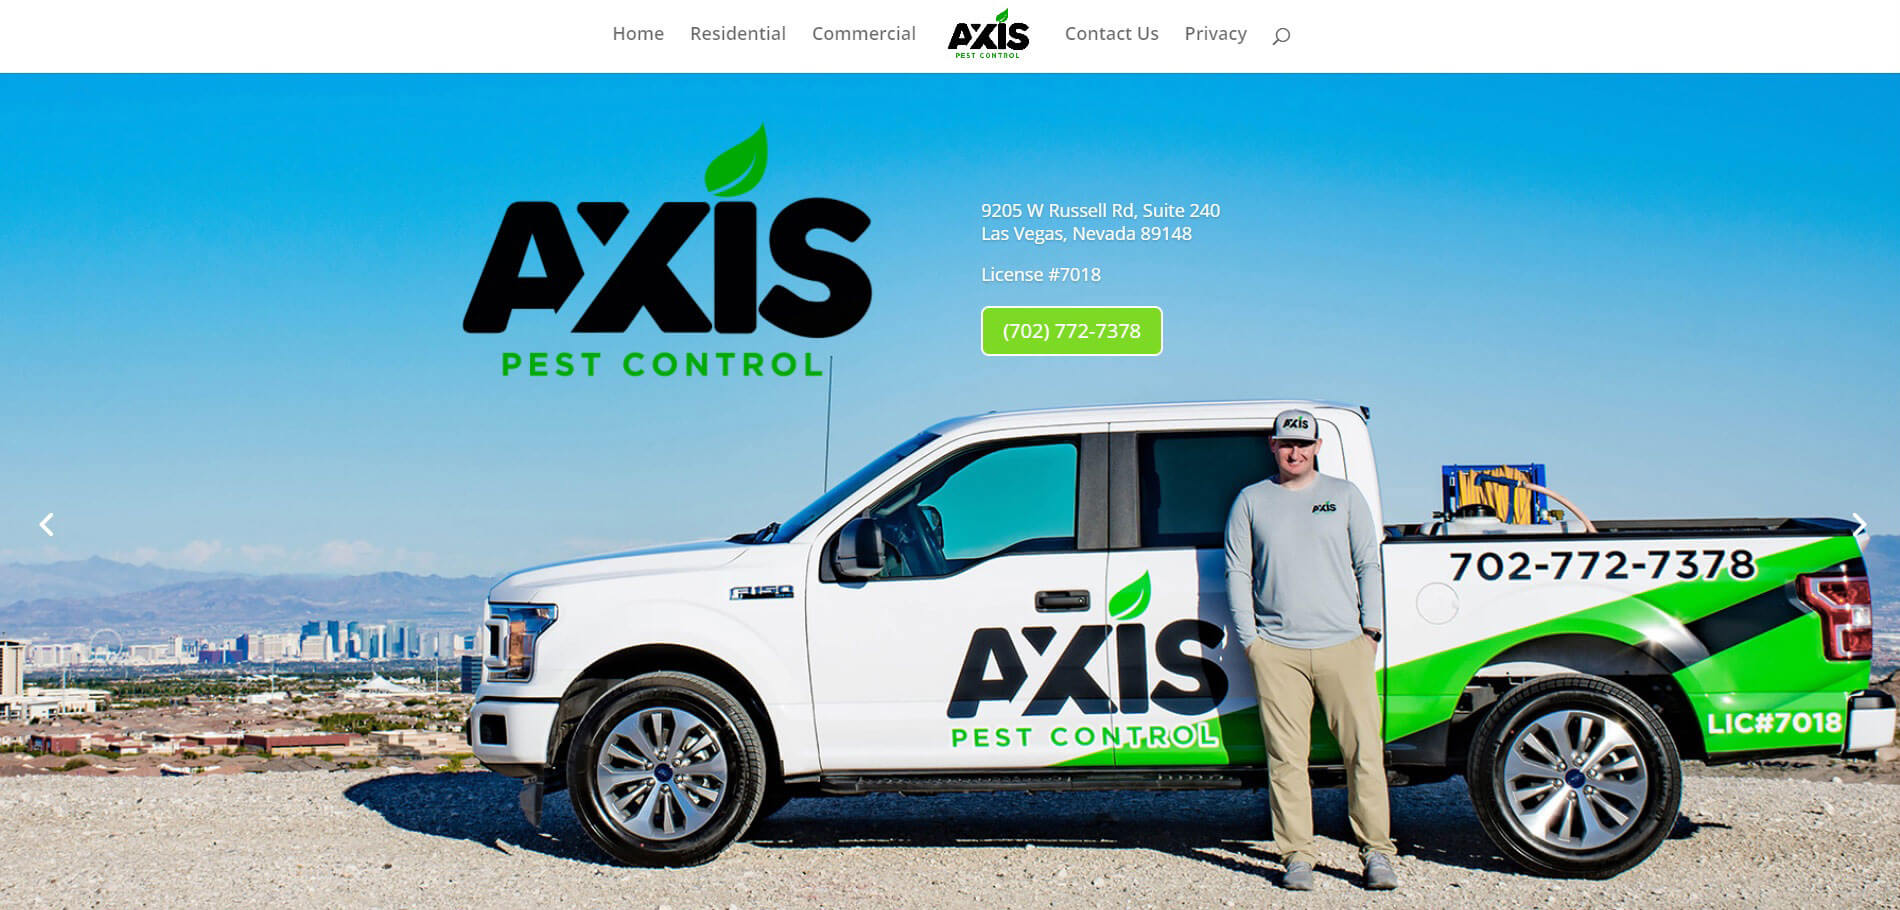 axis pest control